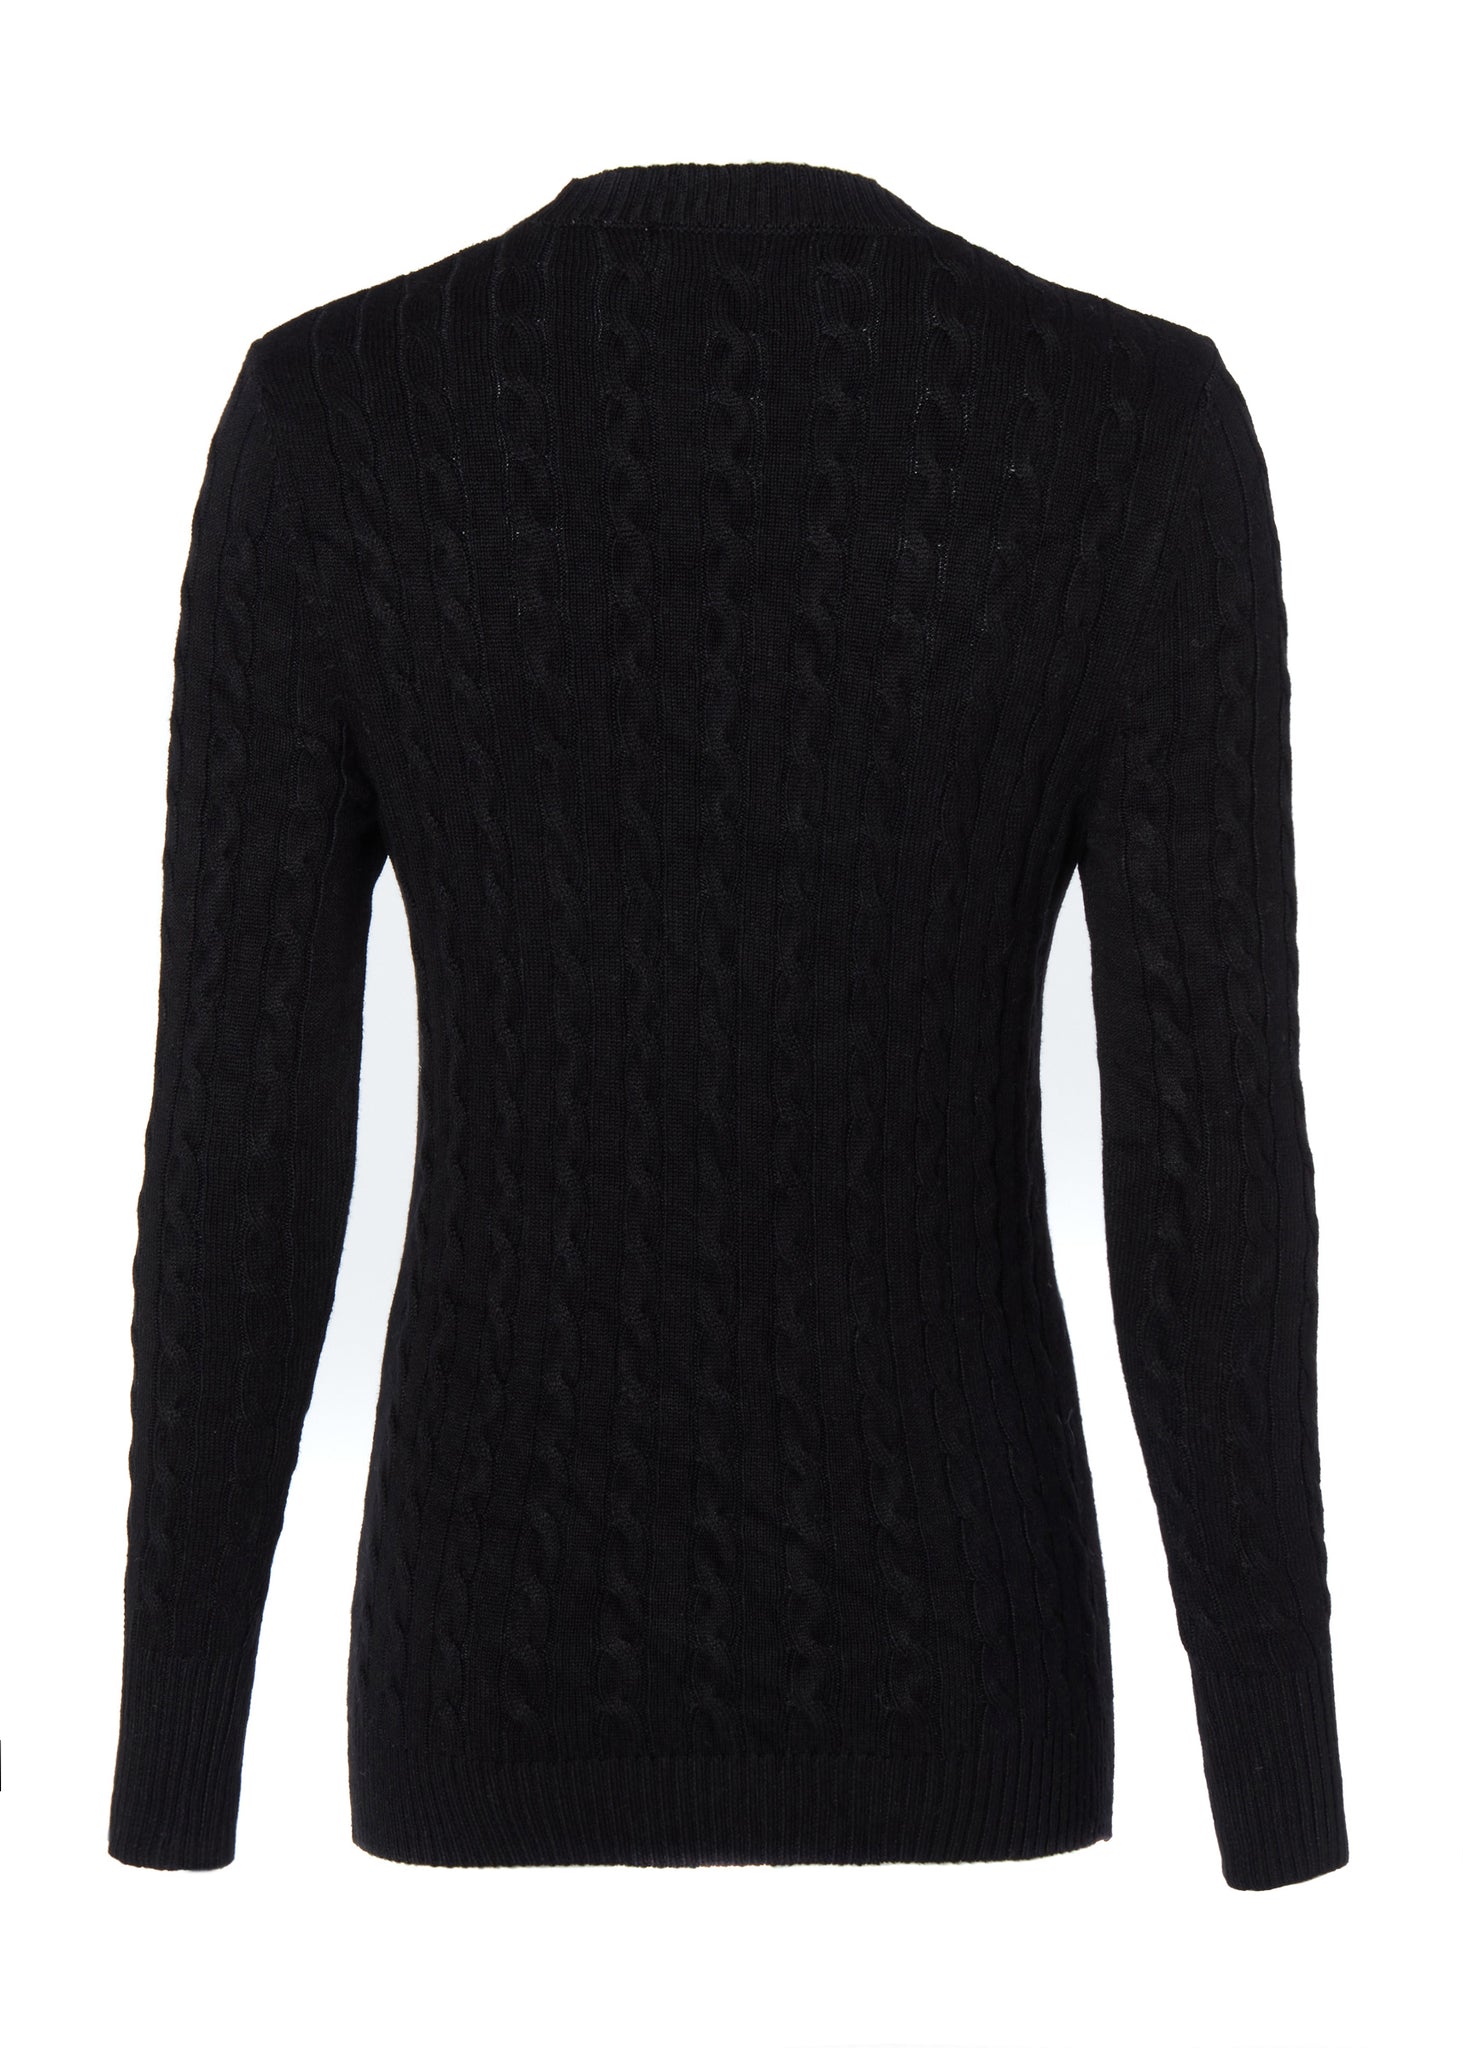 back of womens cable knit jumper in black with ribbed crew neck cuffs and hem